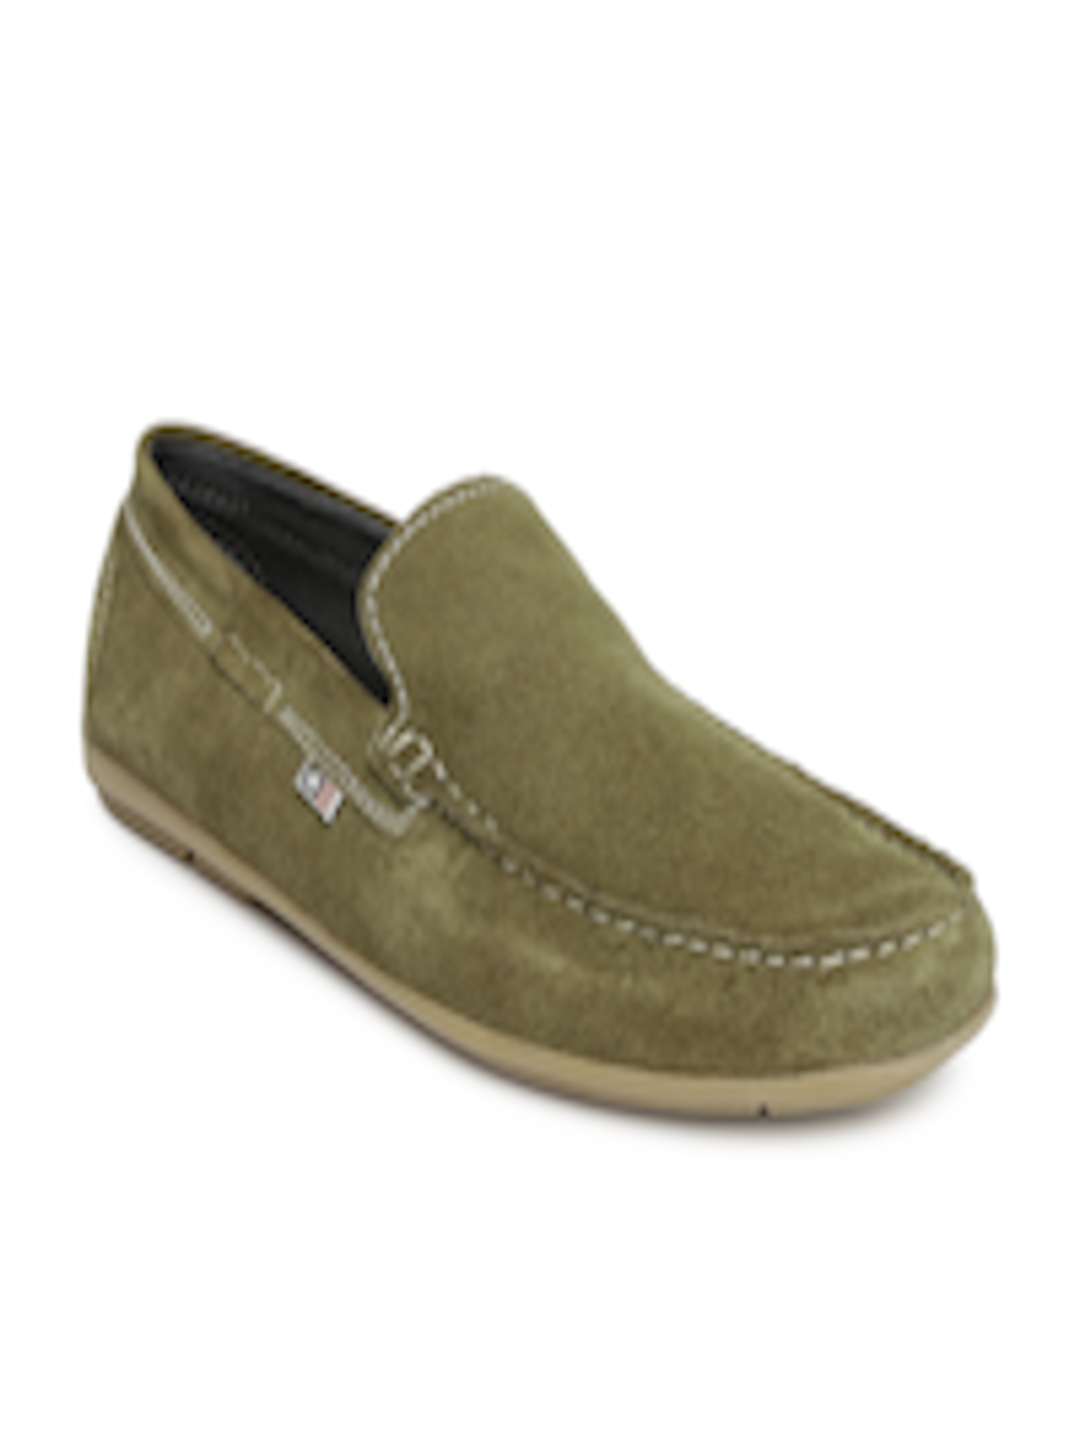 Buy Arrow Men Olive Green Suede Loafers Casual Shoes for